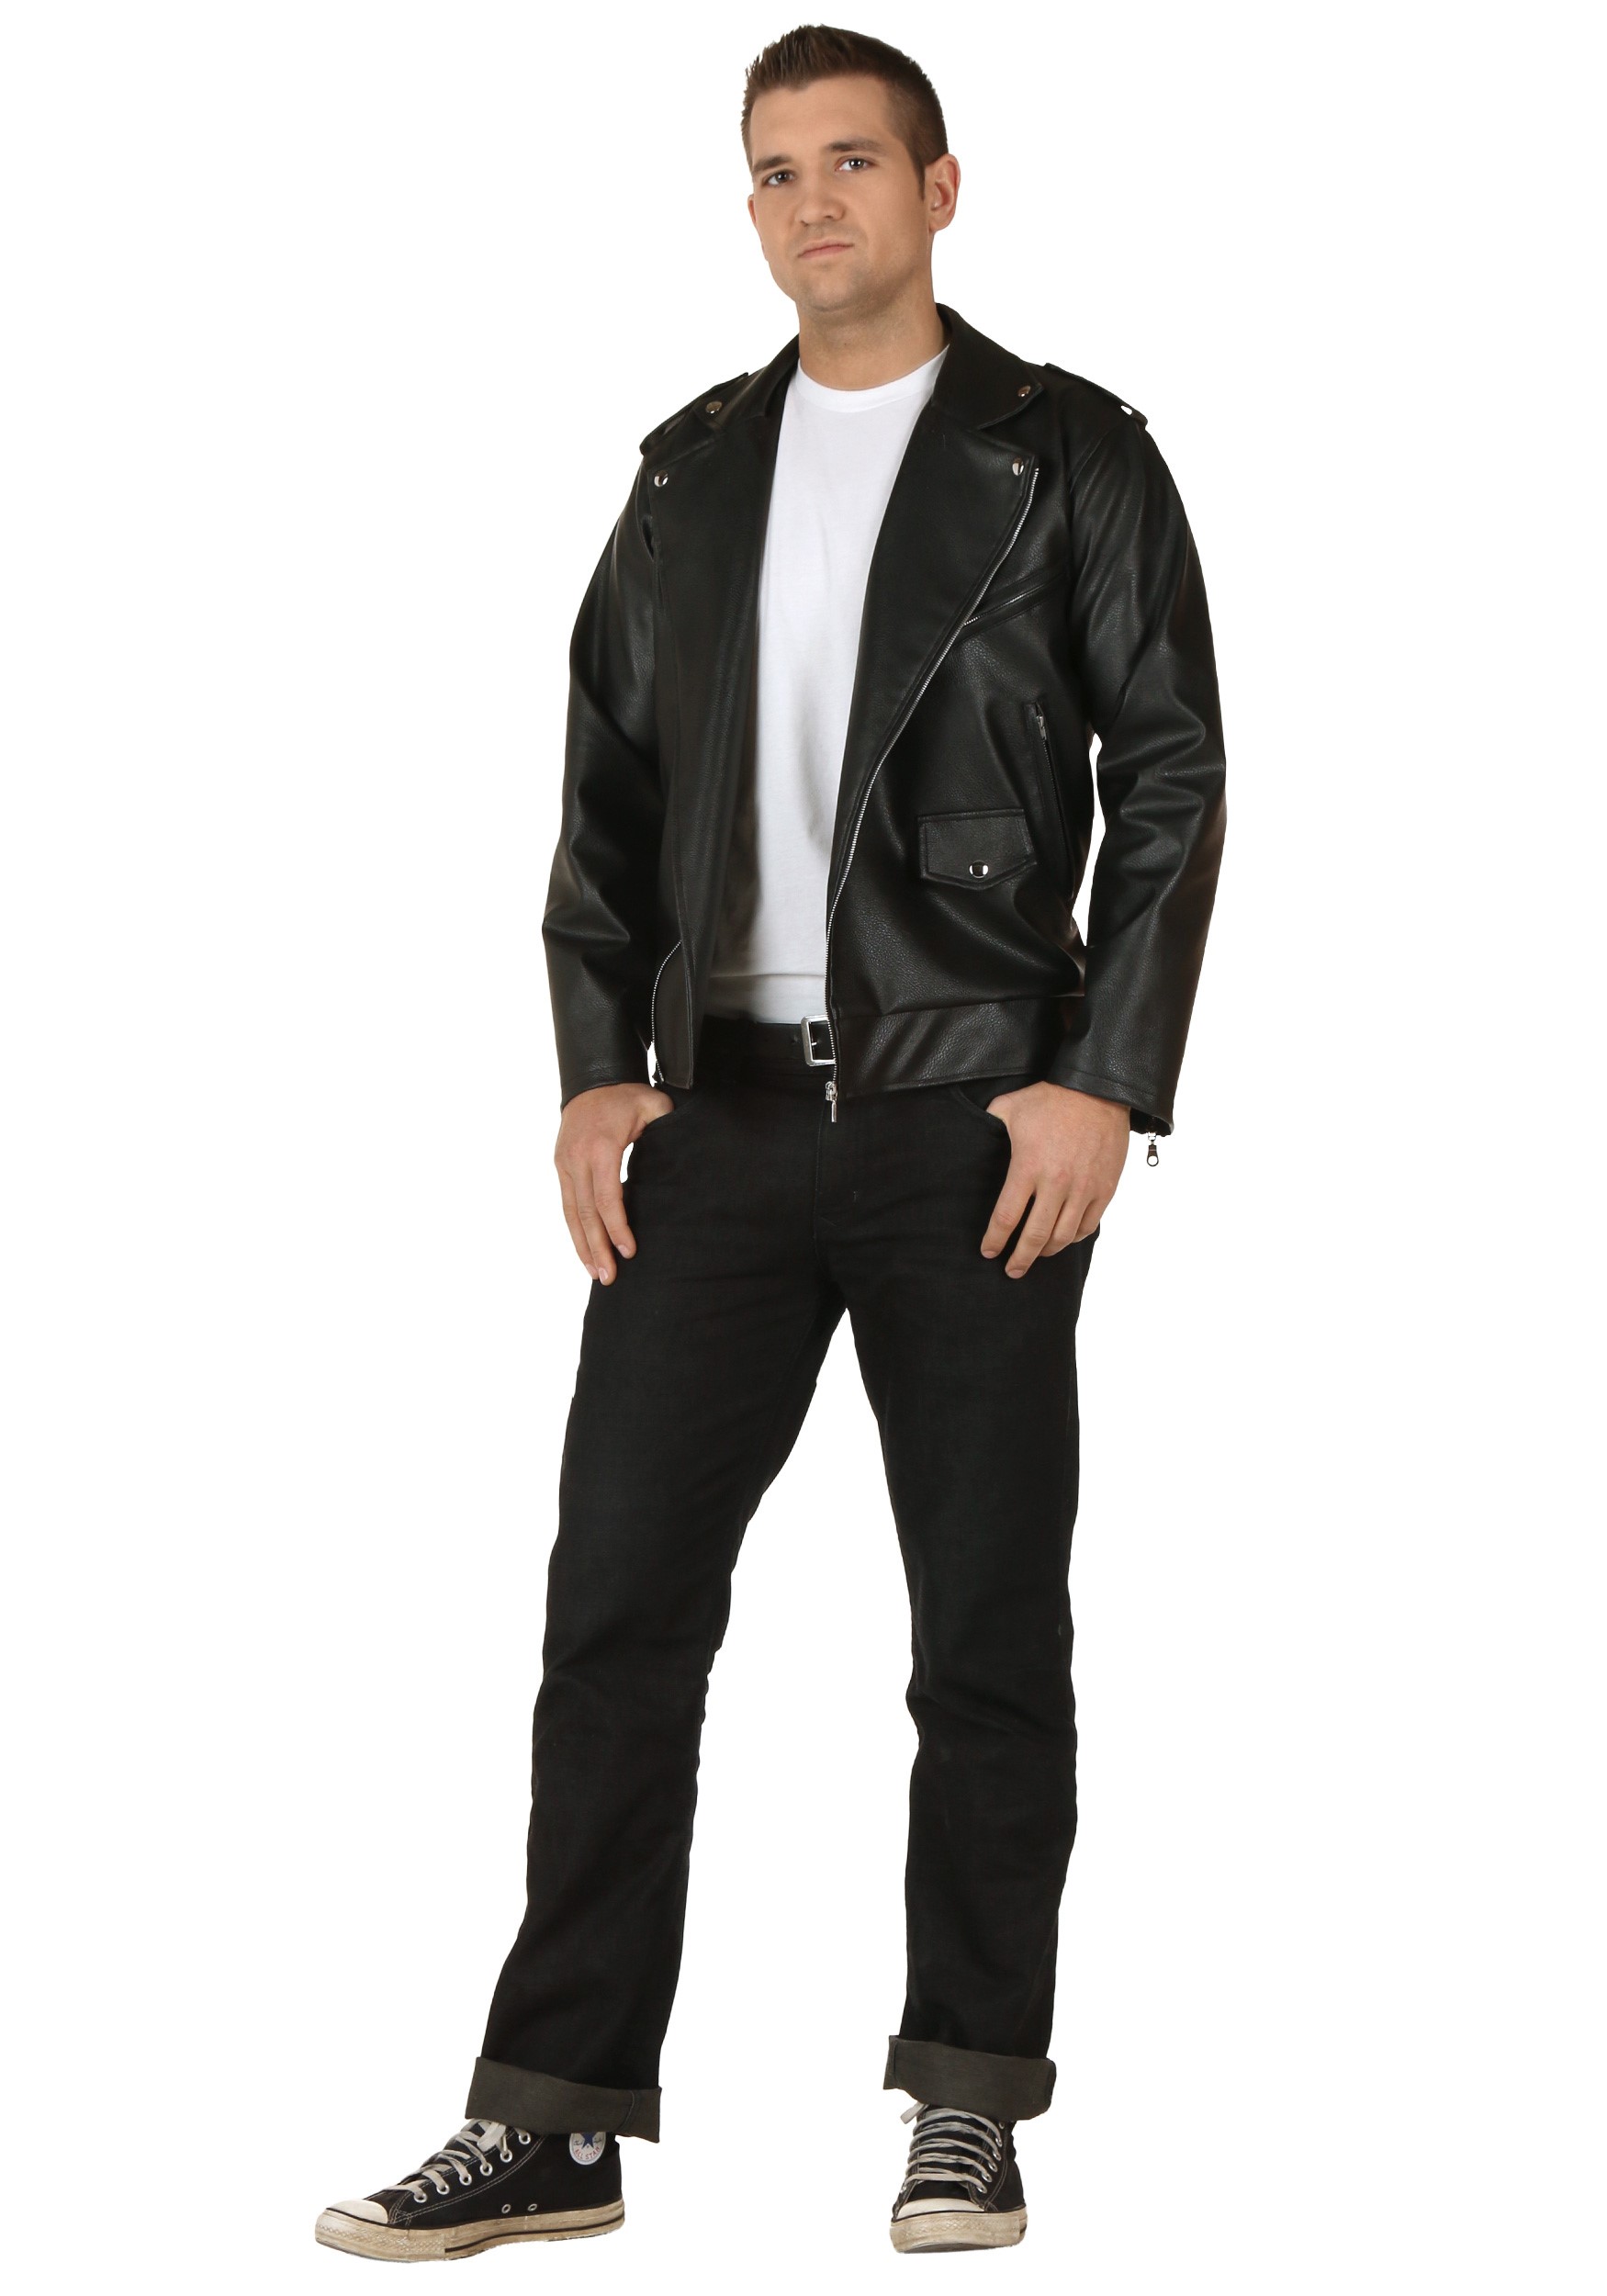 Image of Plus Size Grease Authentic T-Birds Jacket Costume | Exclusive ID GRE6008PL-2X